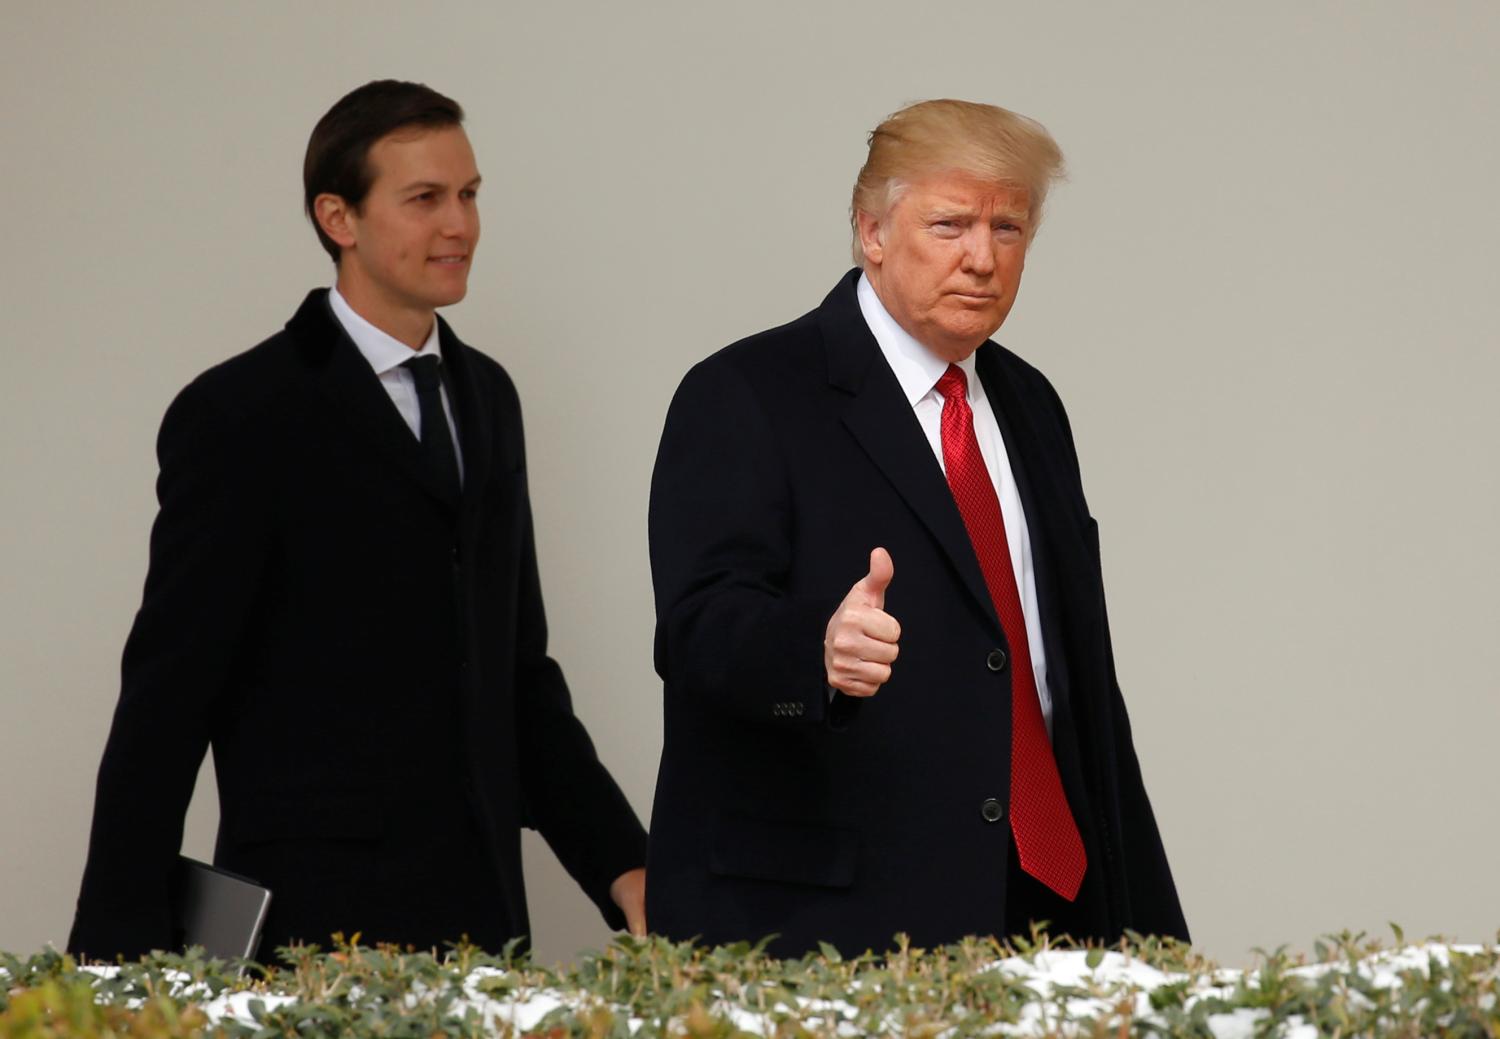 U.S. President Donald Trump gives a thumbs-up as he and White House Senior Advisor Jared Kushner depart the White House in Washington, U.S., March 15, 2017. REUTERS/Kevin Lamarque